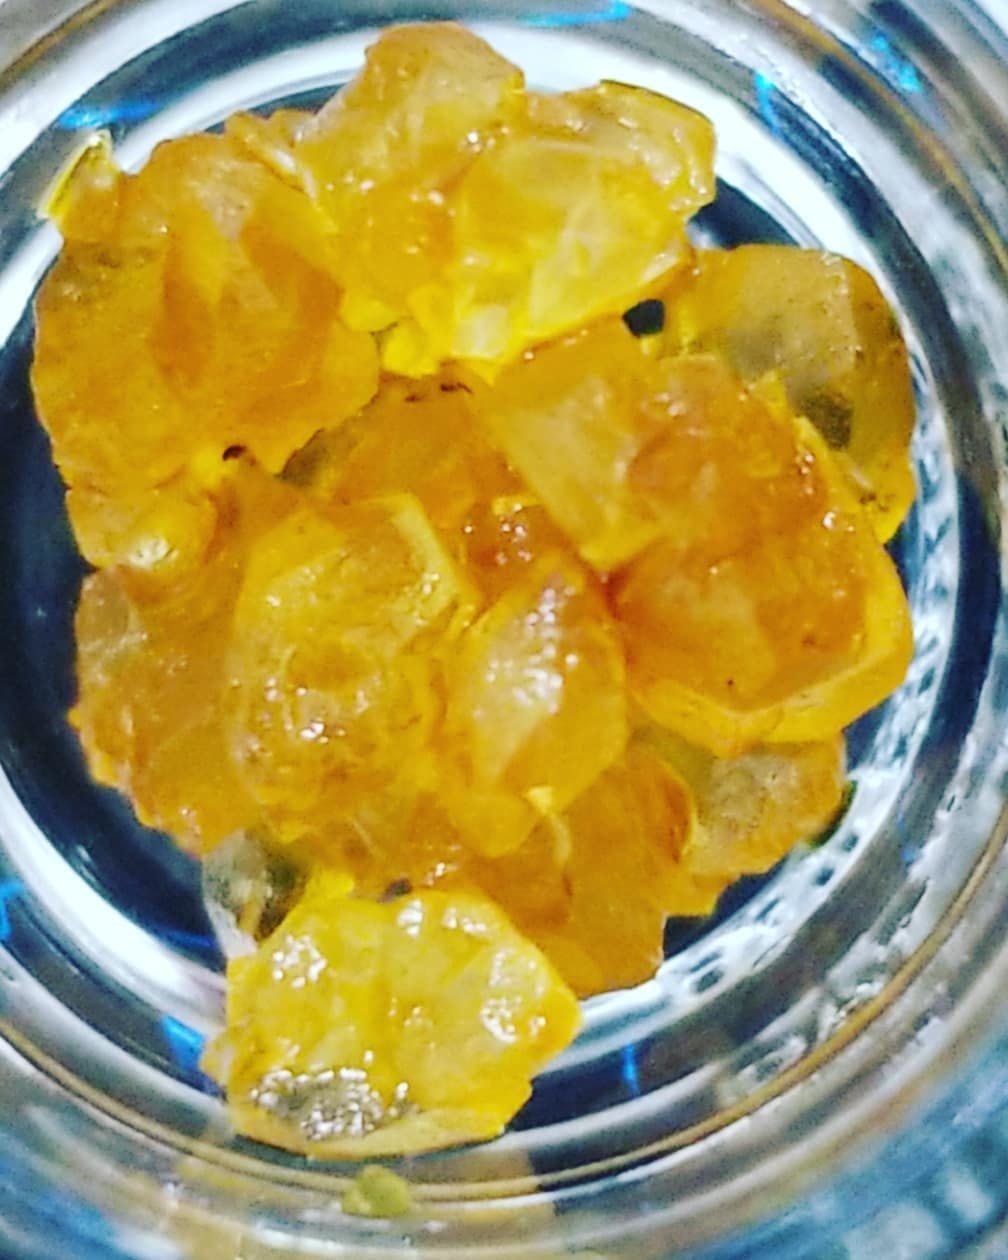 concentrate-double-black-extracts-thca-facet-crystals-chem-dawg-x